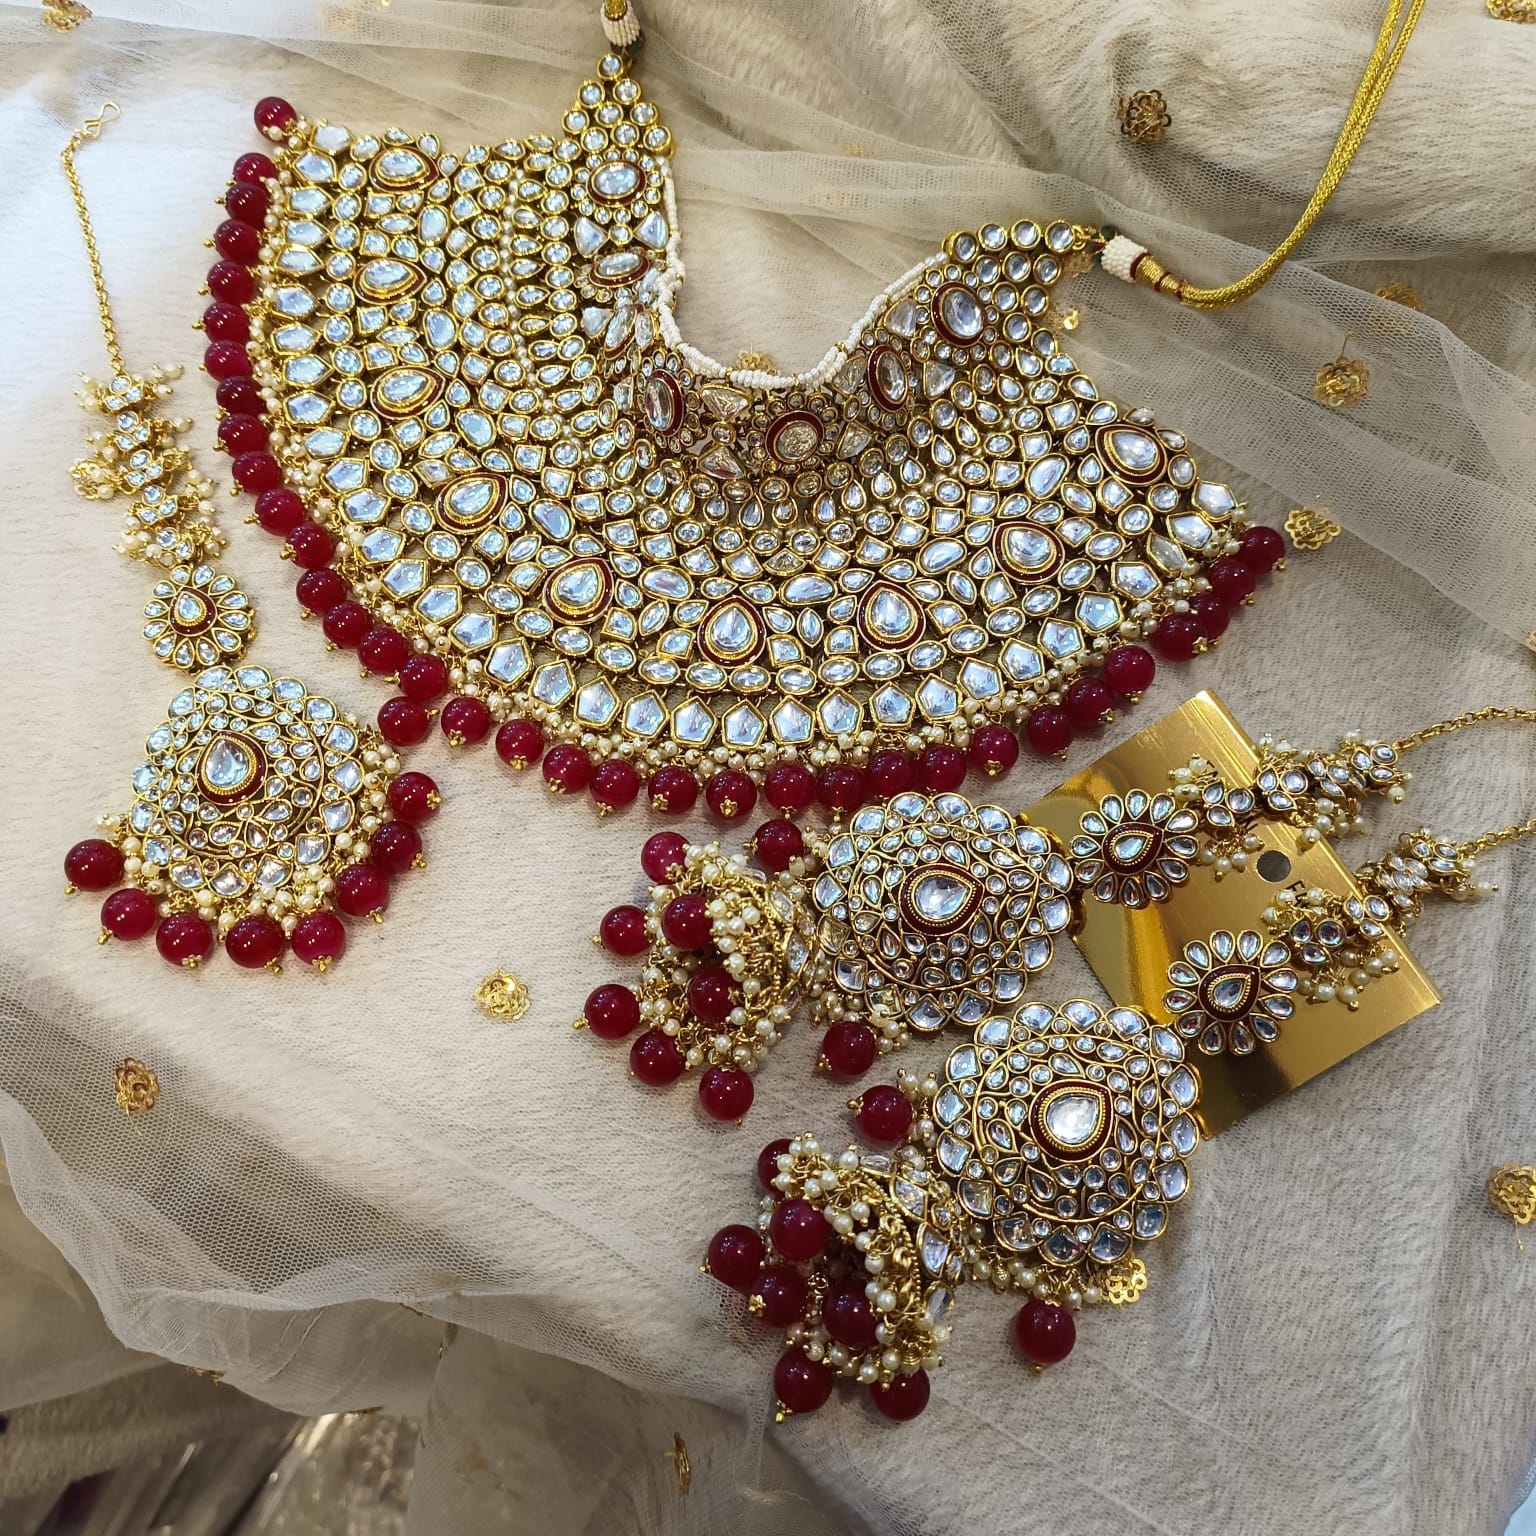 Bridal jewelry trends for Indian weddings in the USA – Sneha